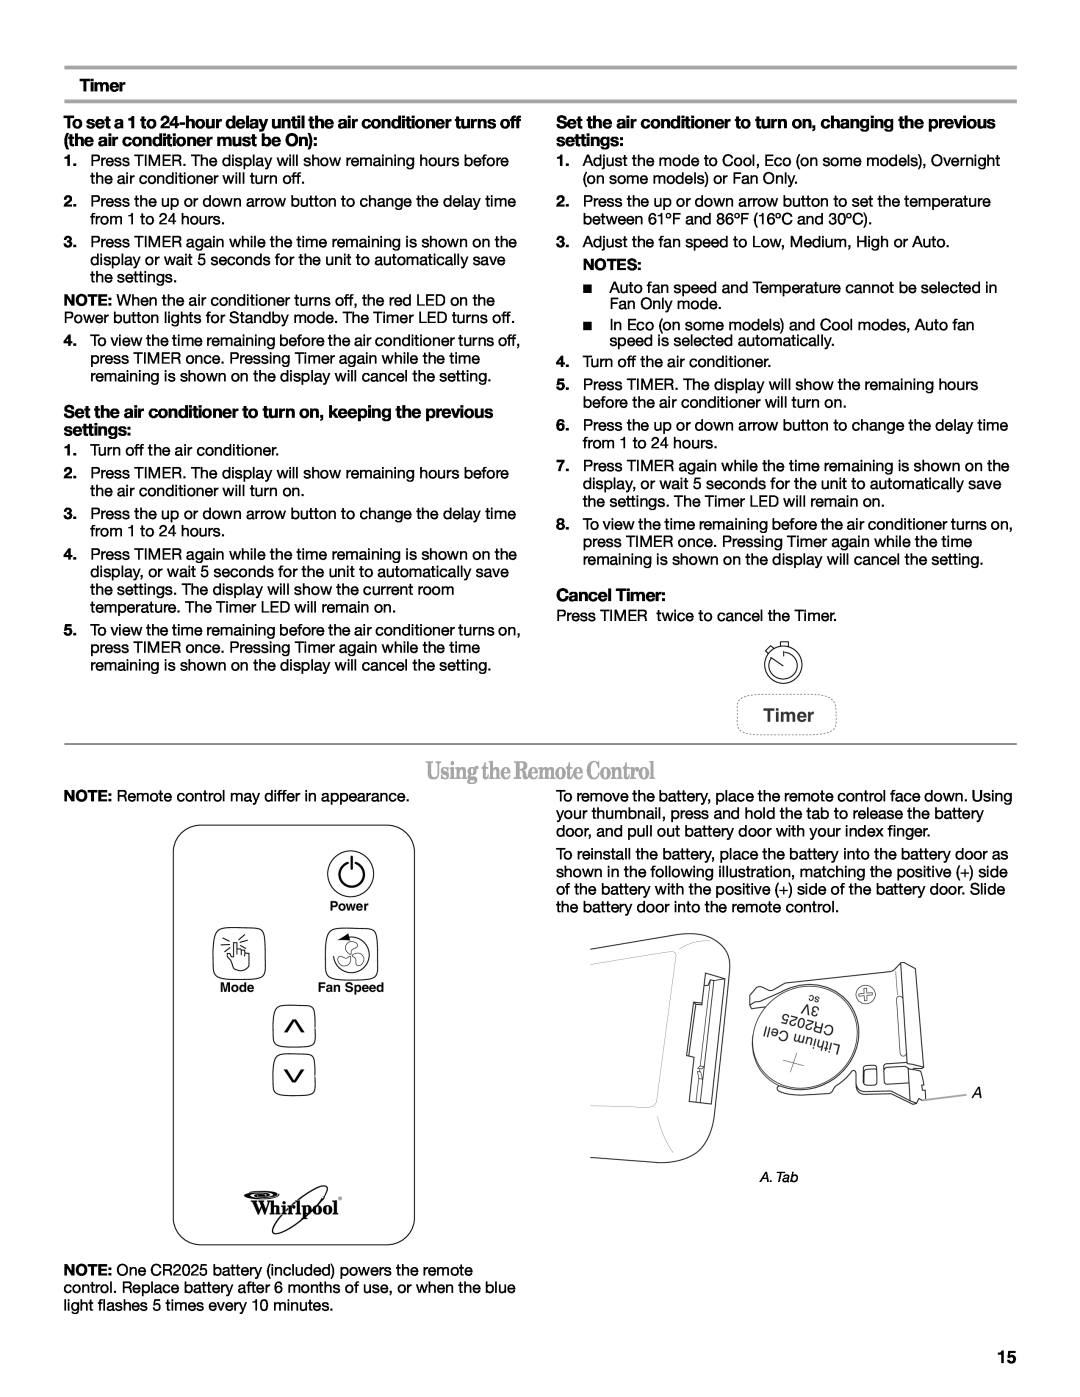 Whirlpool 66161279 manual Using the Remote Control, Cancel Timer 